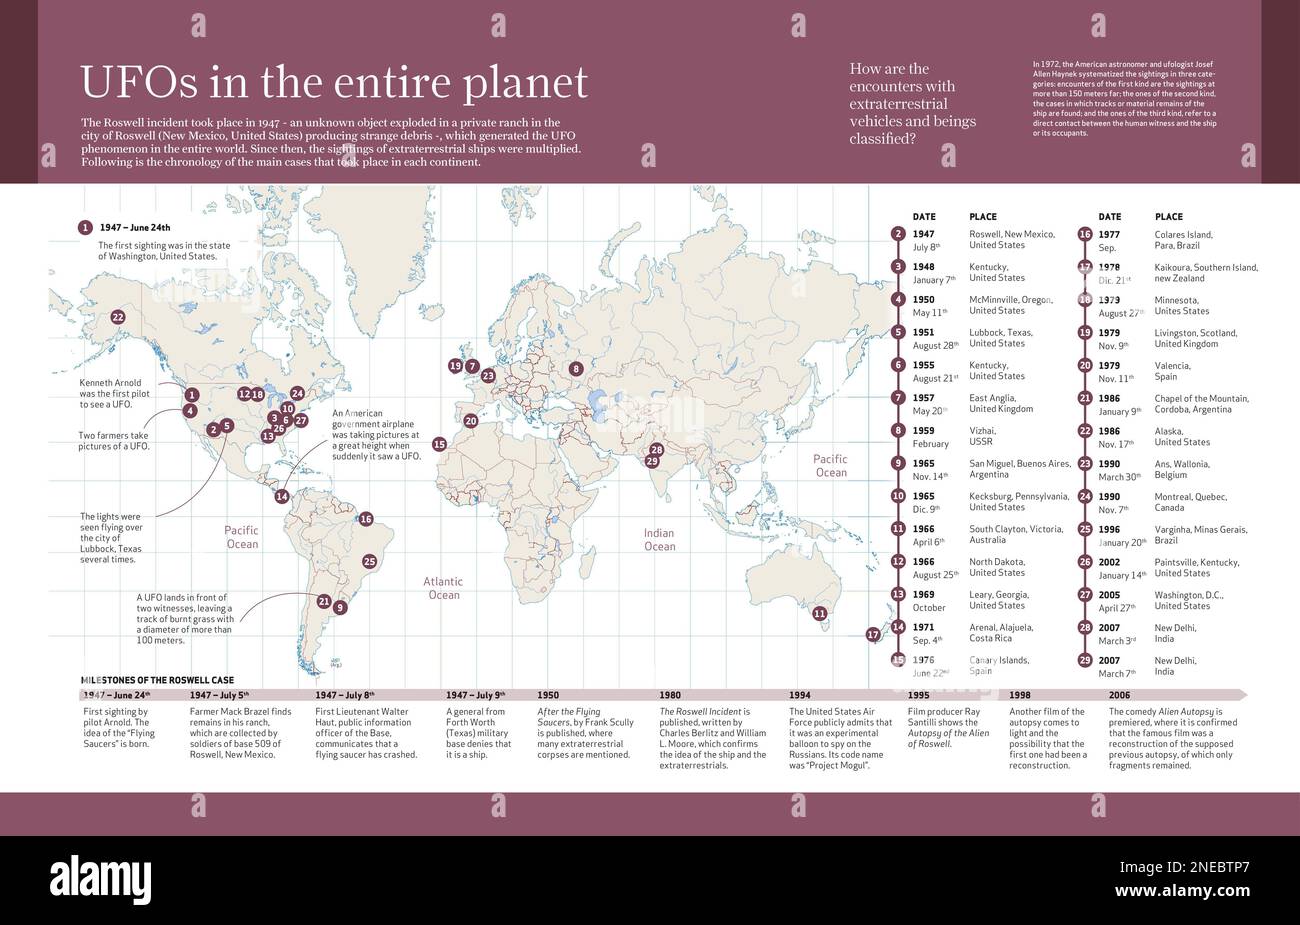 Infographic about UFO sightings throughout the planet ordered chronologically. [Adobe InDesign (.indd); 4960x3188]. Stock Photo